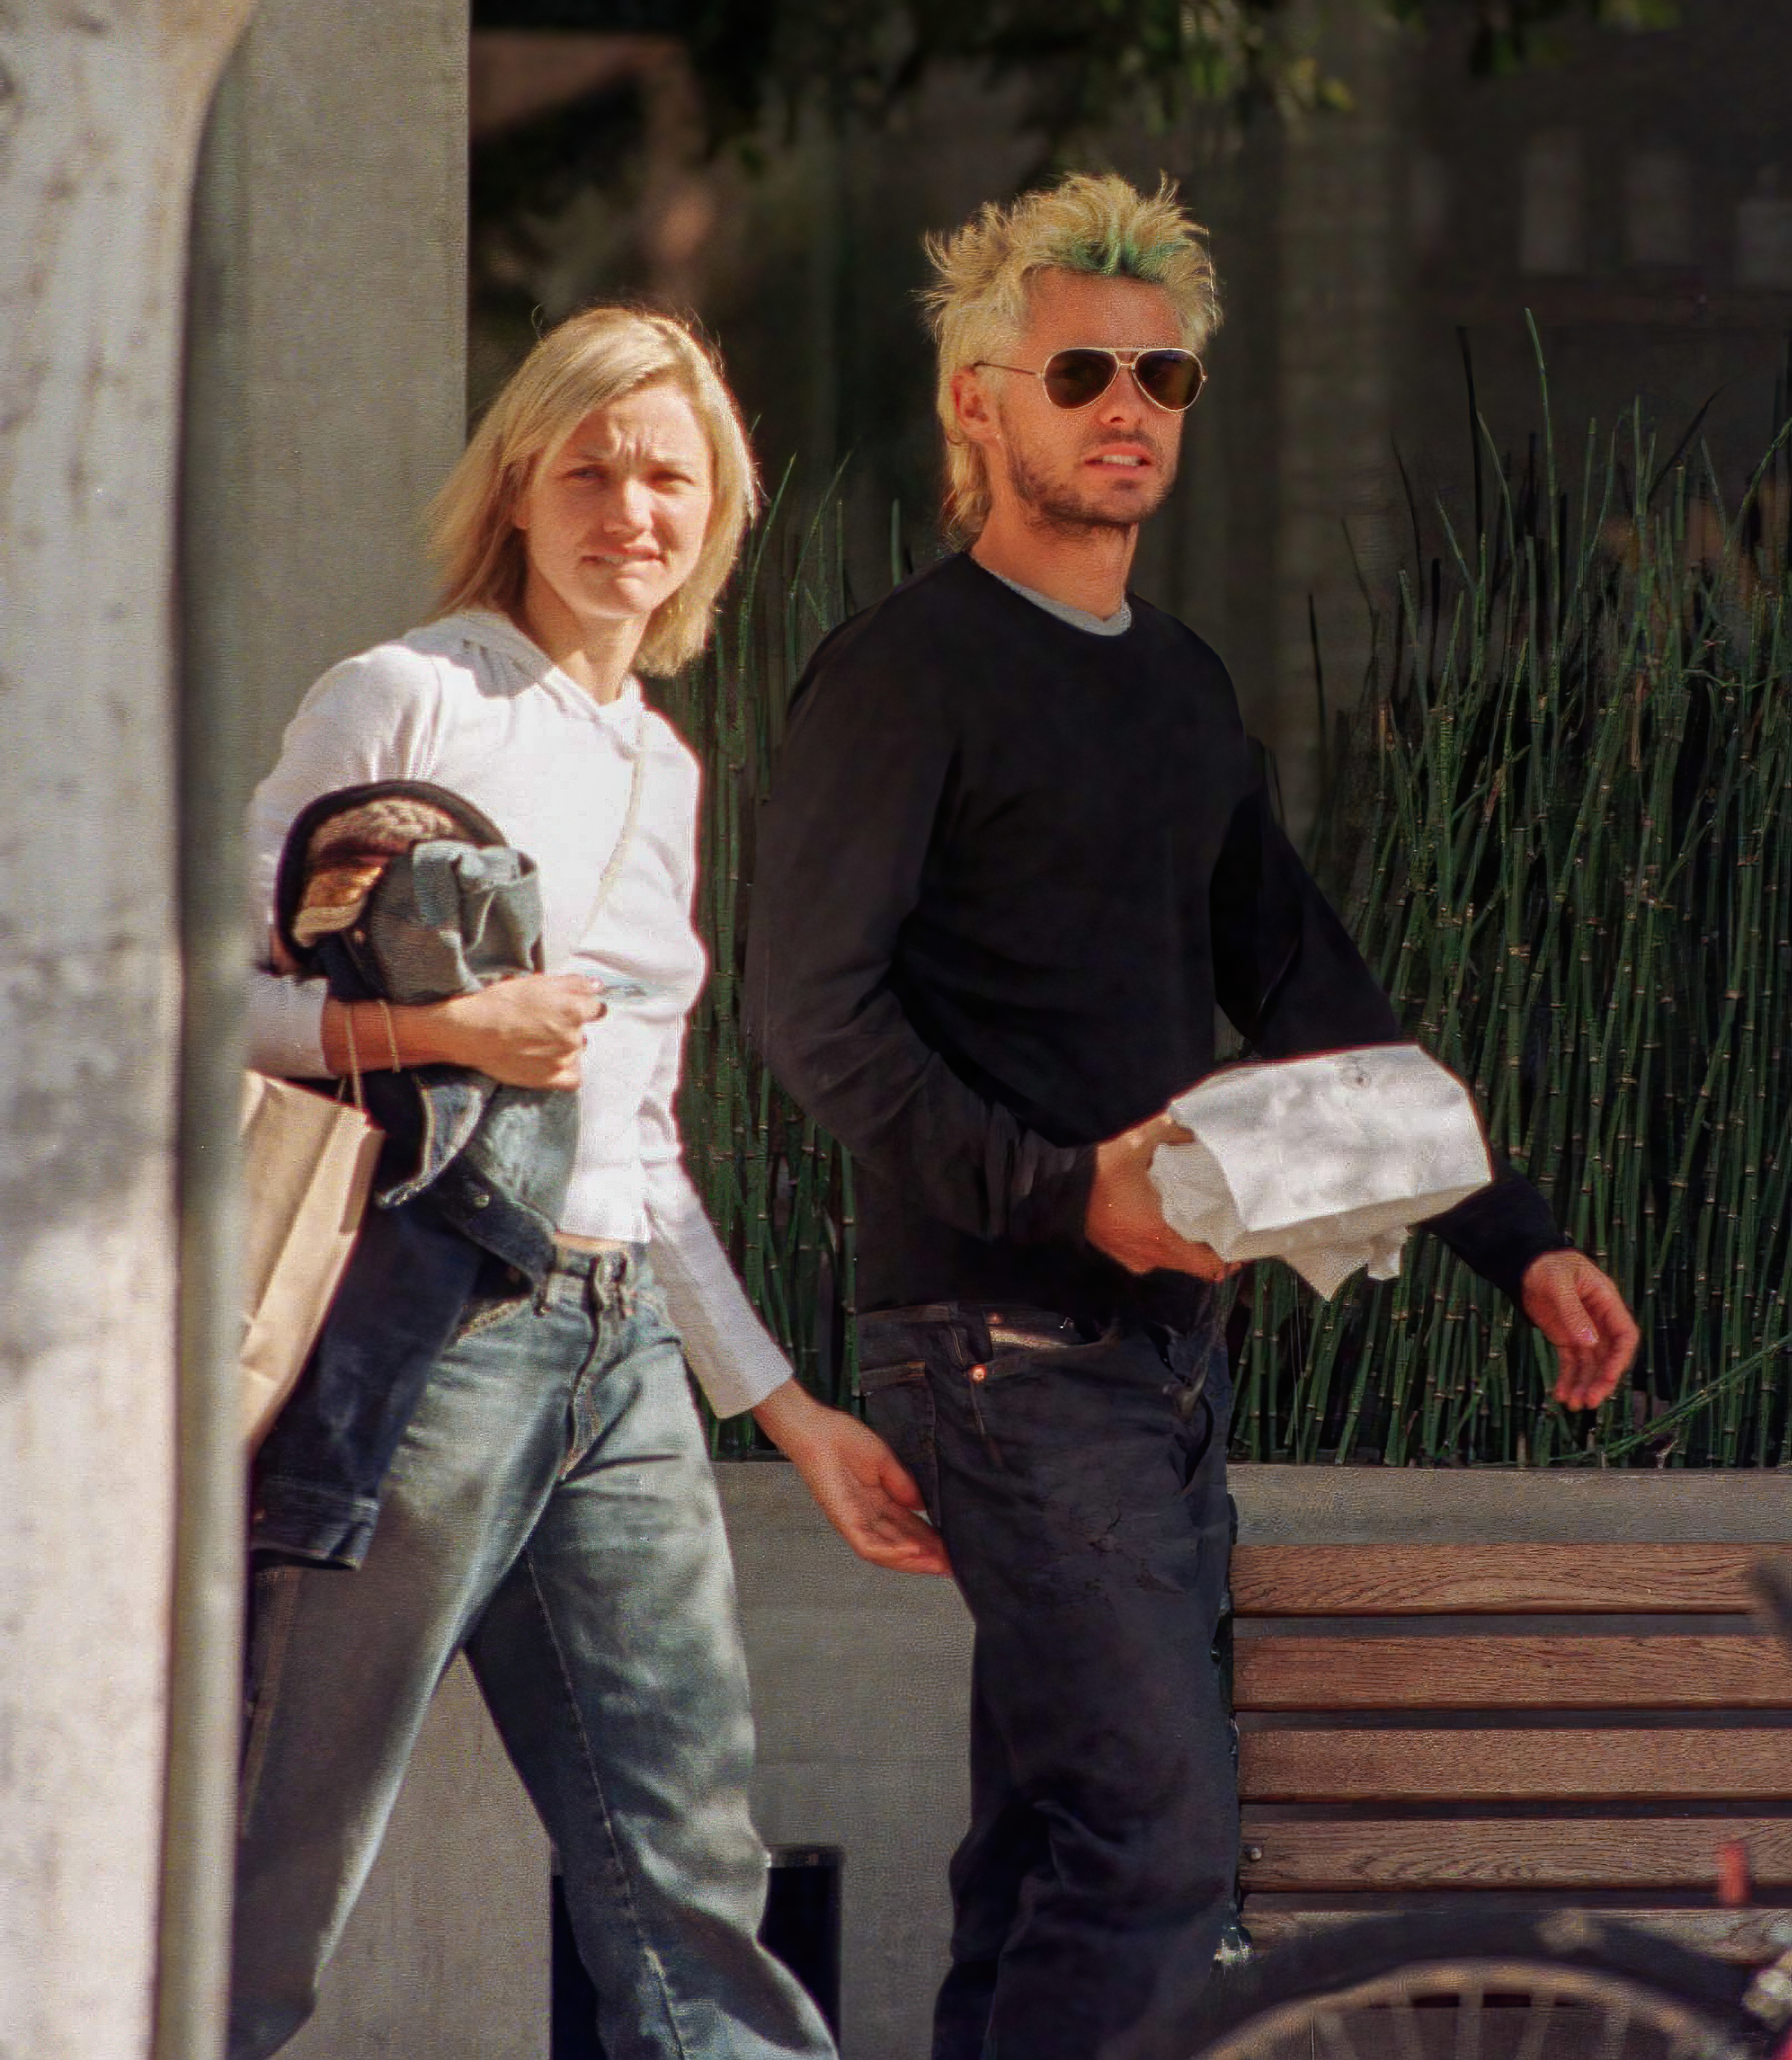 Cameron Diaz and Jared Leto in Los Angeles, California on January 03, 2000 | Source: Getty Images